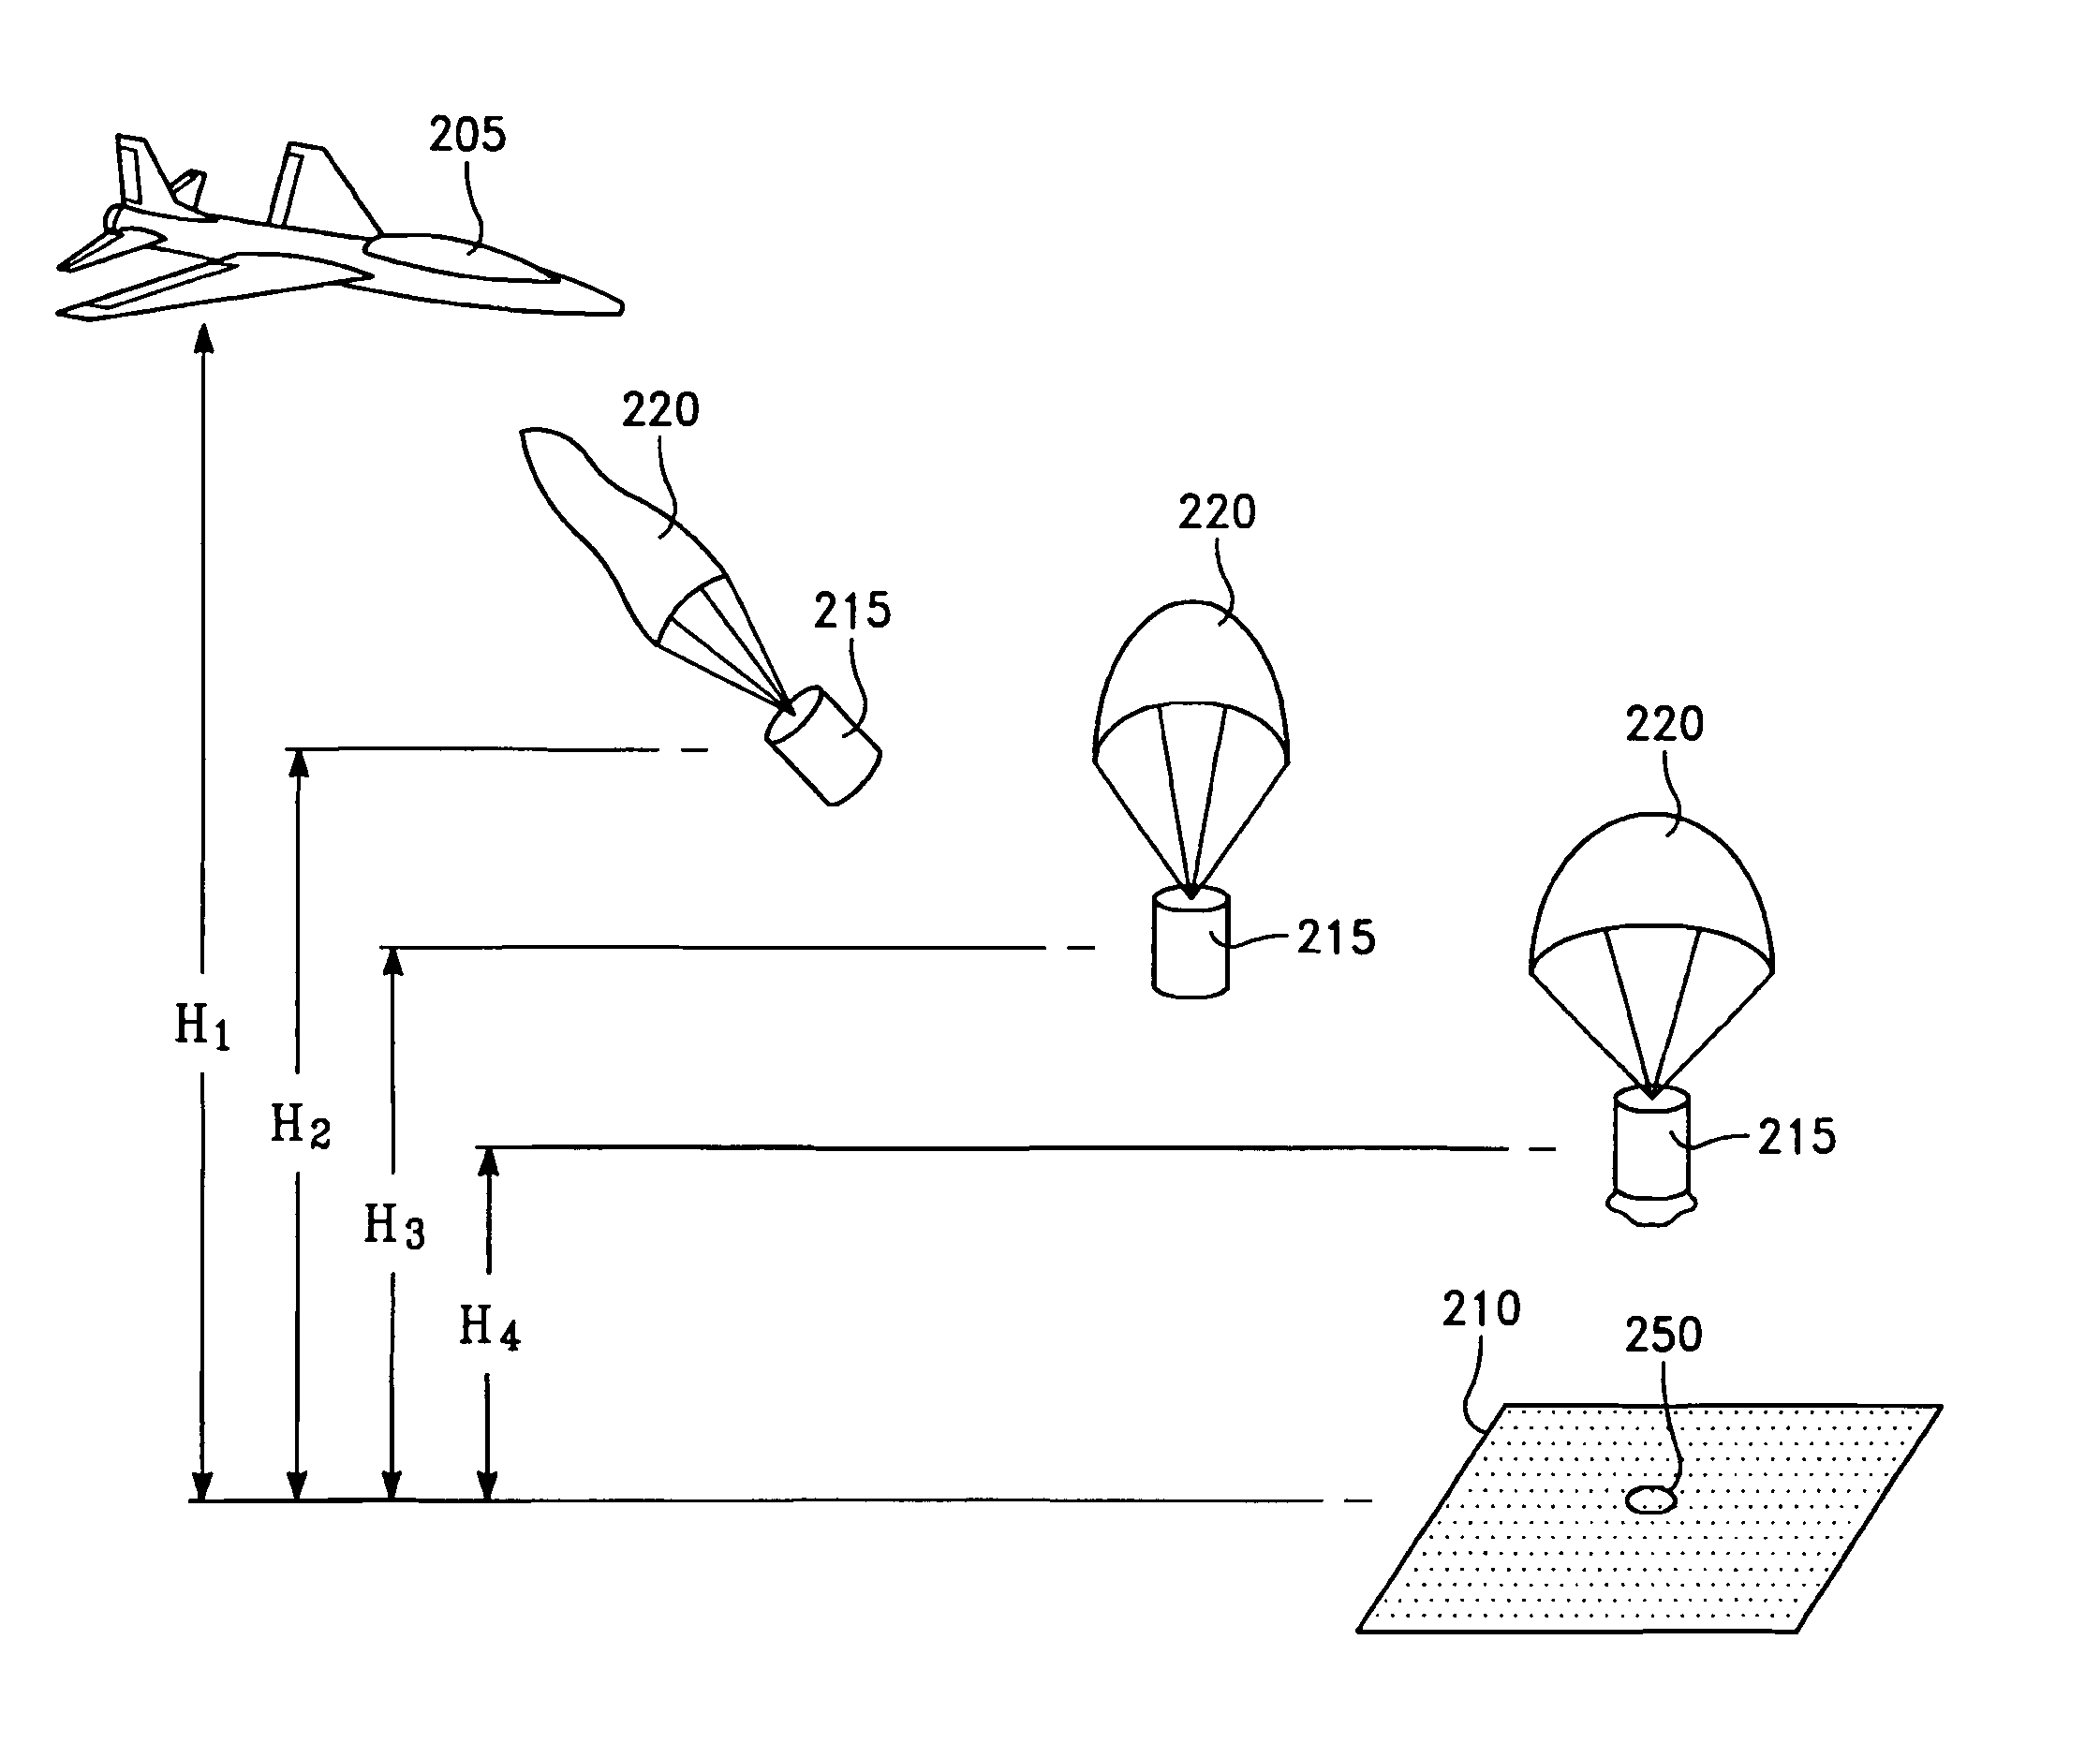 Airborne deployed radio frequency identification sensing system to detect an analyte